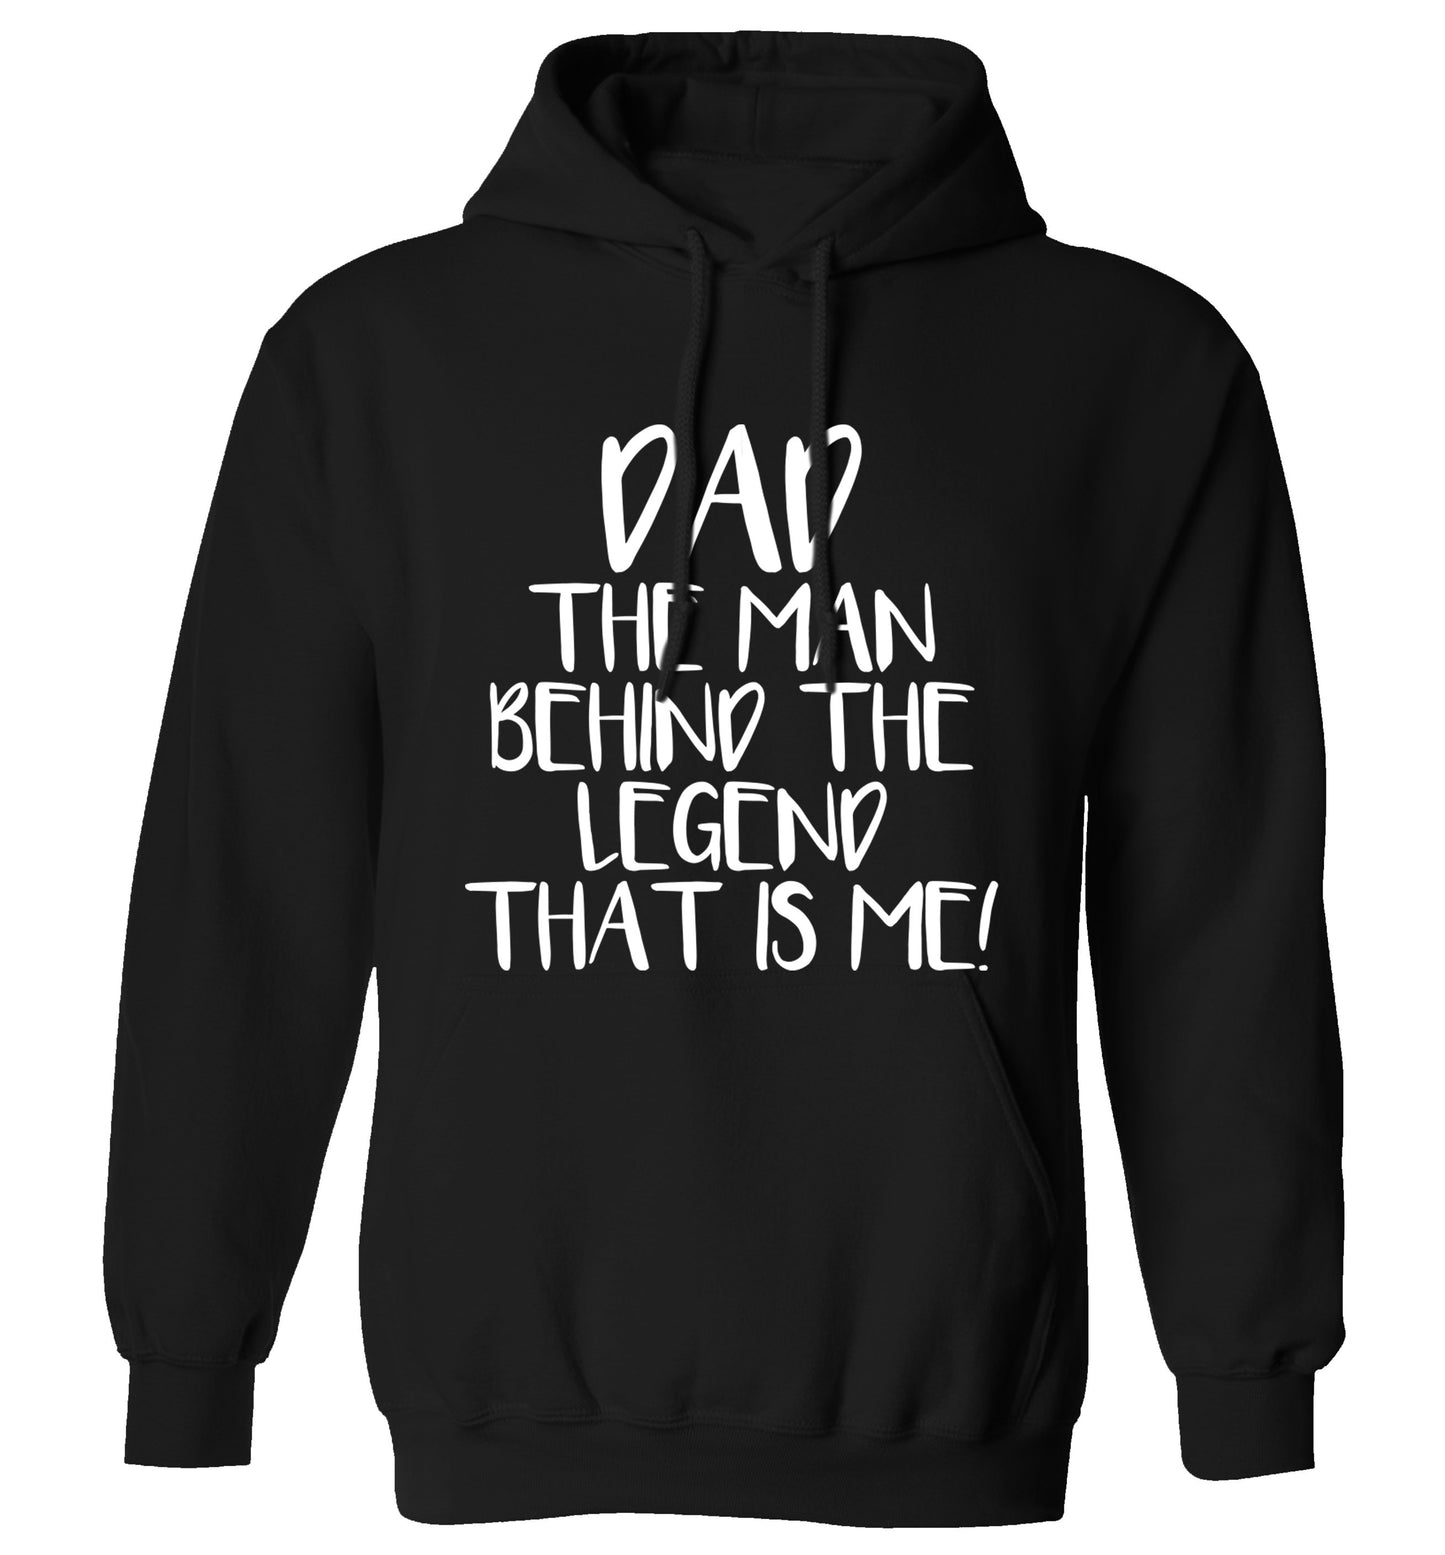 Dad the man behind the legend that is me! adults unisex black hoodie 2XL